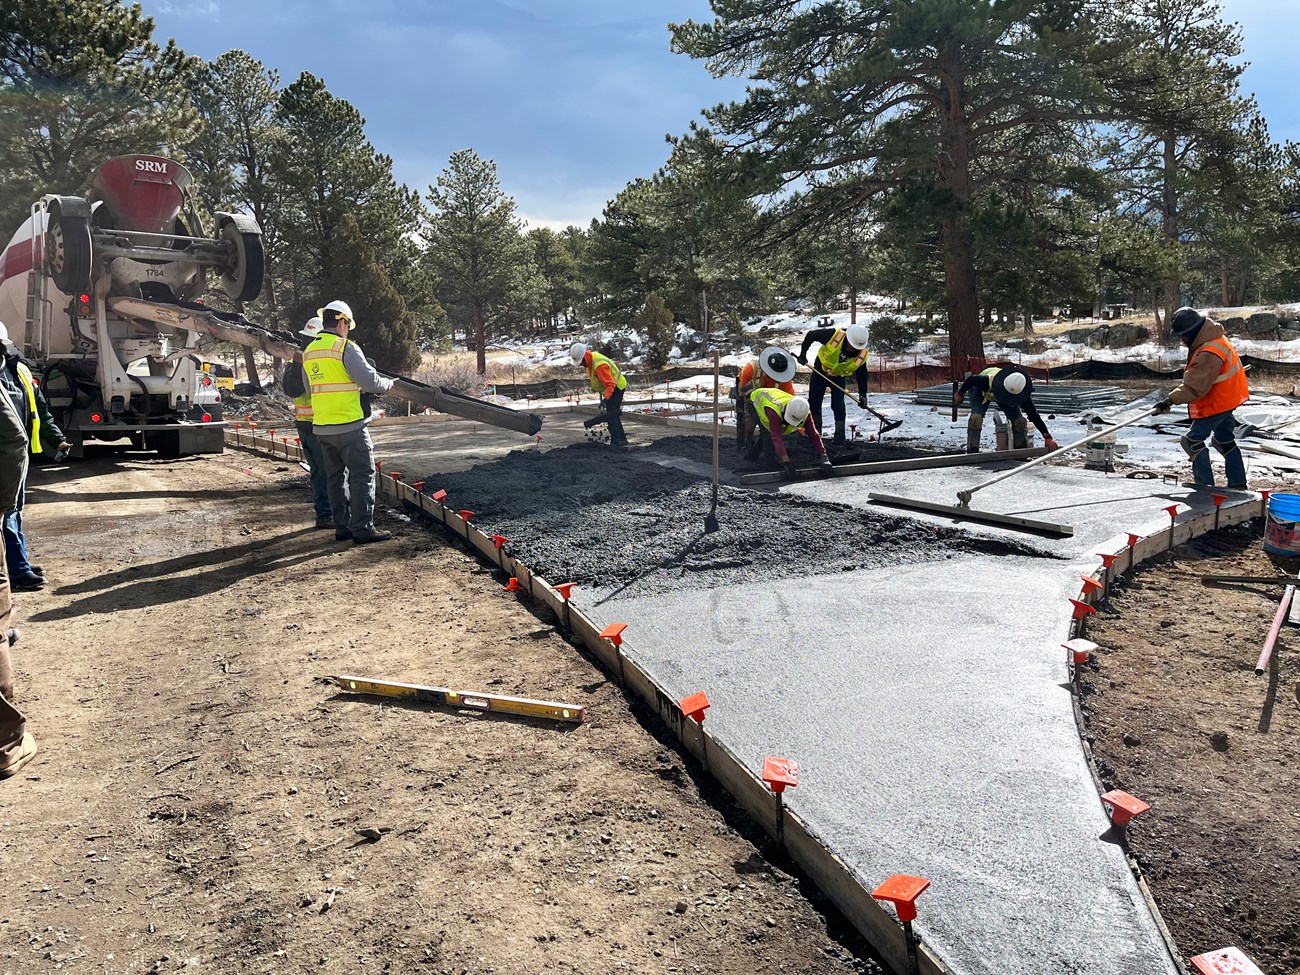 Working to Pour Concrete for New Accessible Campsite